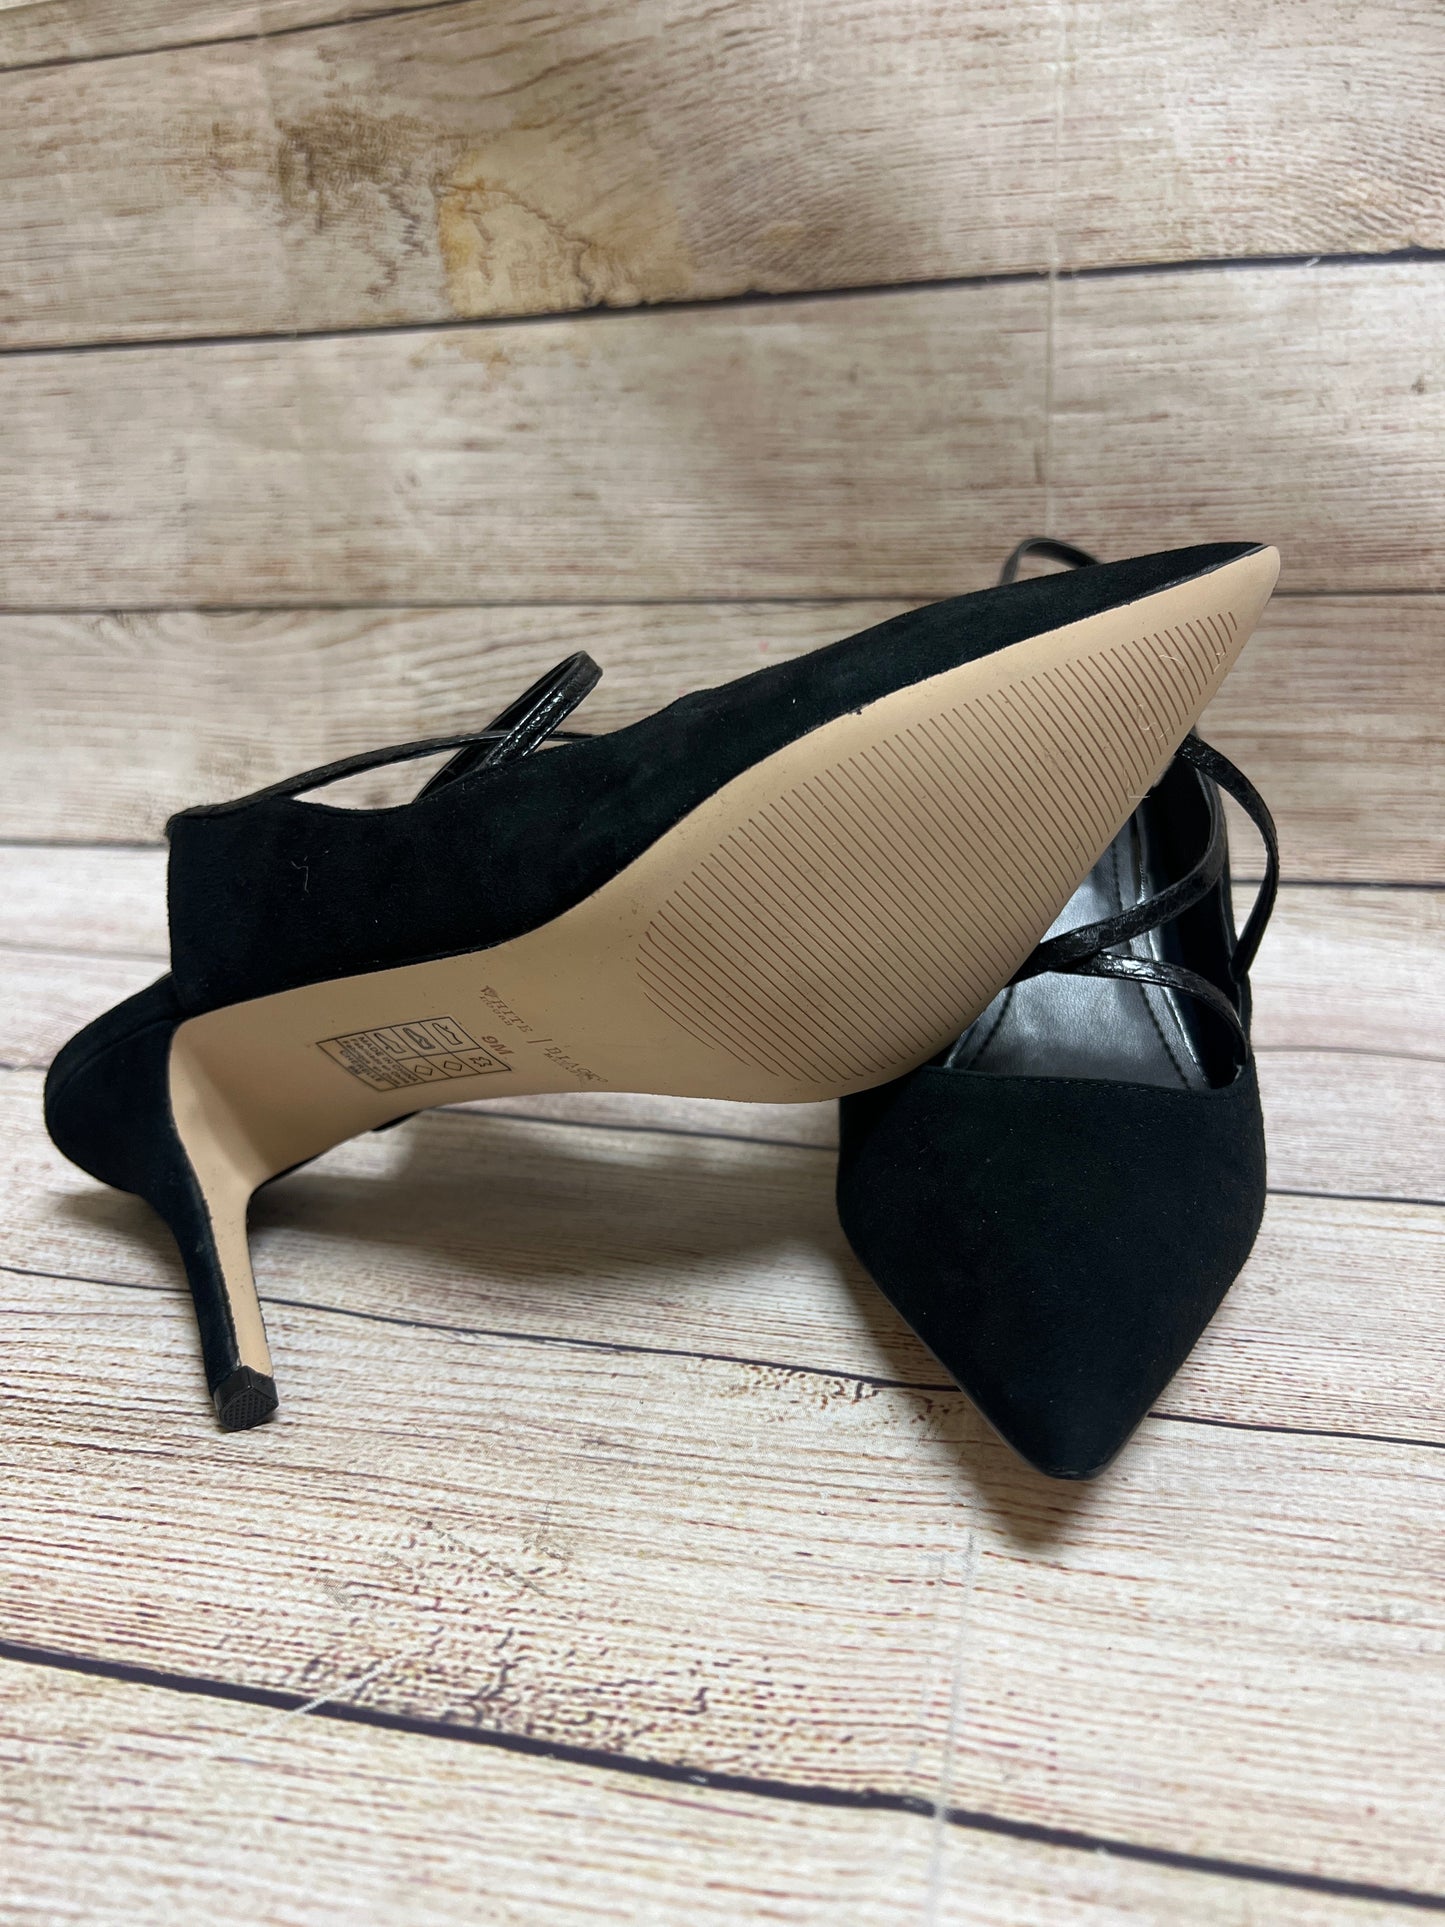 Shoes Heels Stiletto By White House Black Market  Size: 9